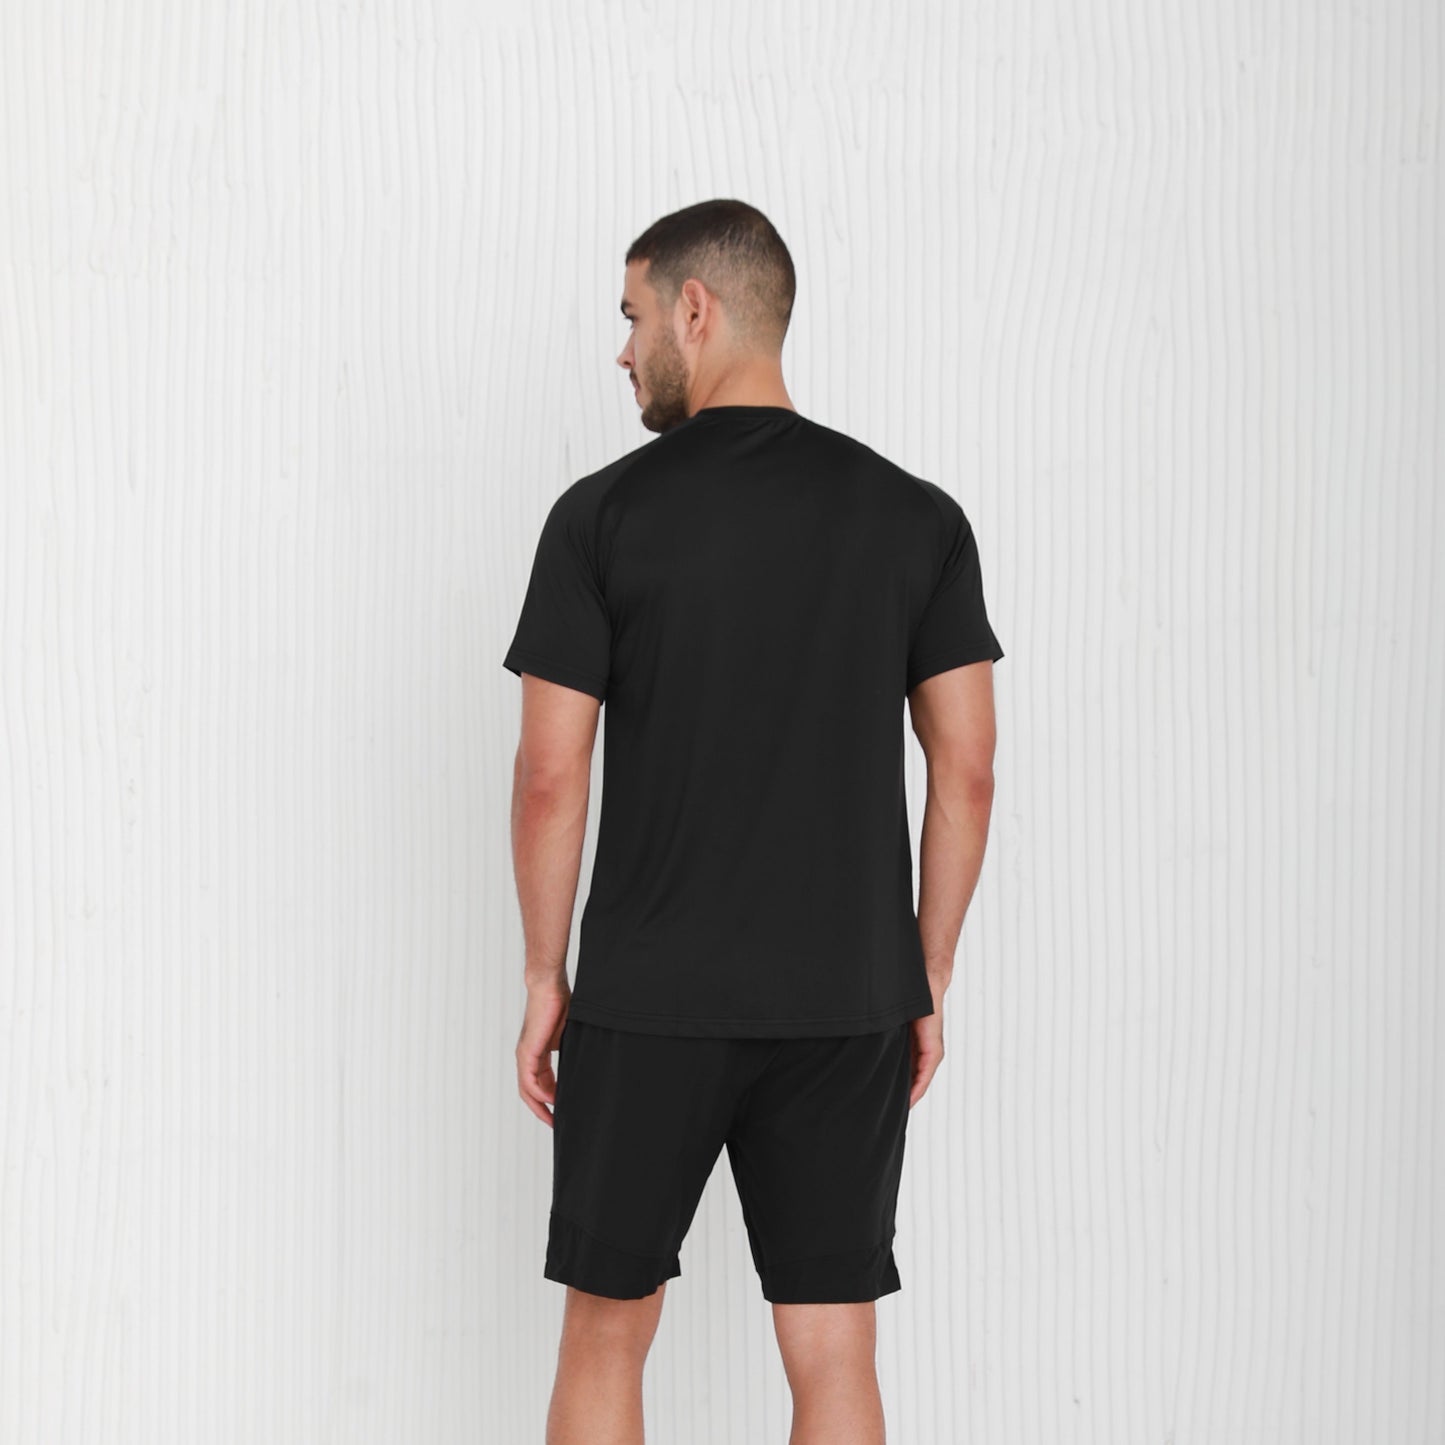 All Essential Shorts in Black